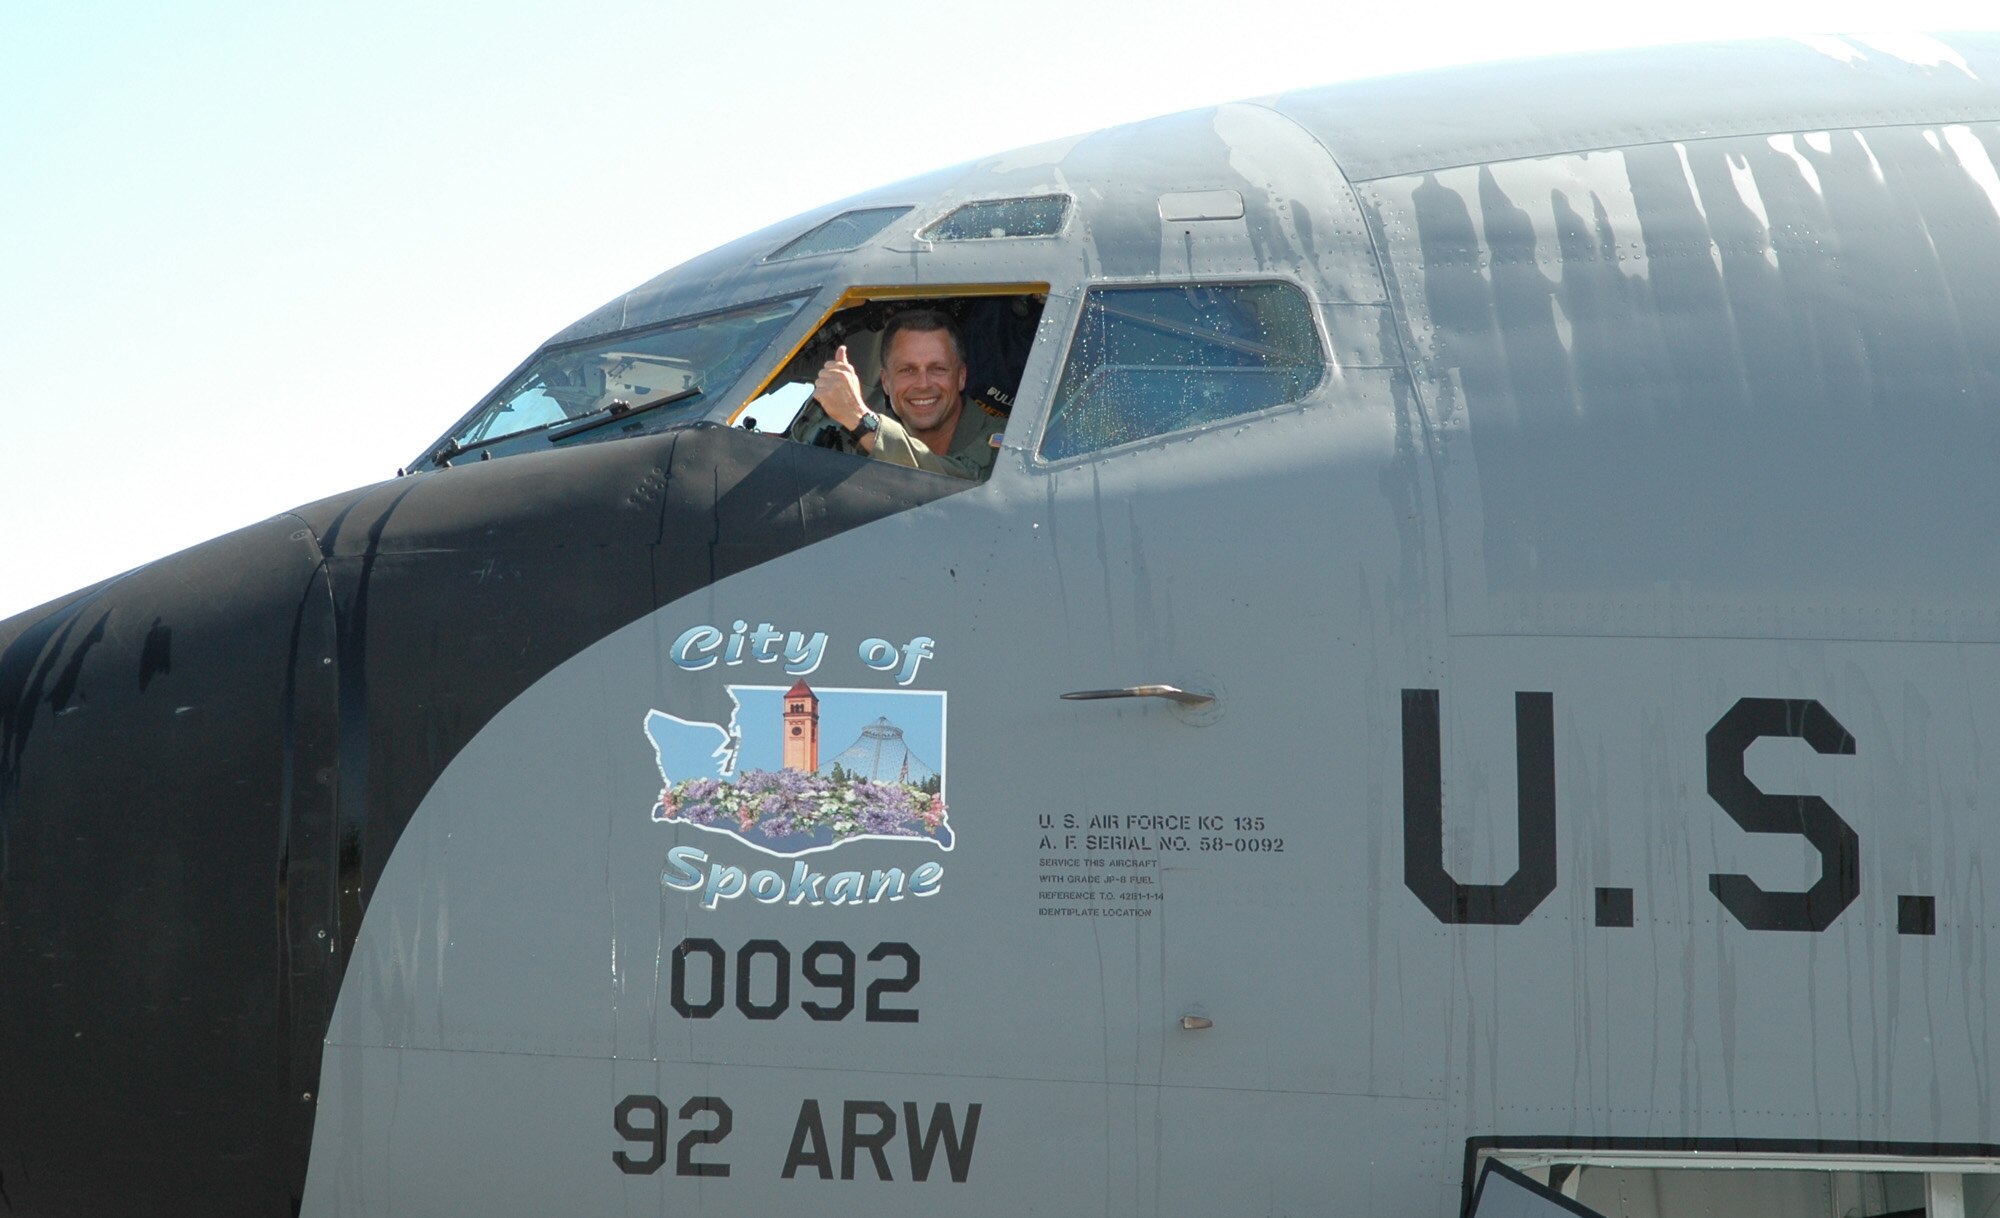 FAIRCHILD AIR FORCE BASE, Wash – Col. Scott Hanson, 92nd Air Refueling Wing commander, gives a thumbs-up before exiting a KC-135 Stratotanker after his fini flight May 19. Colonel Hanson will head for Scott Air Force Base, Ill., following the change-of command ceremony May 22. (U.S. Air Force photo/ Airman 1st Class Kali L. Gradishar)